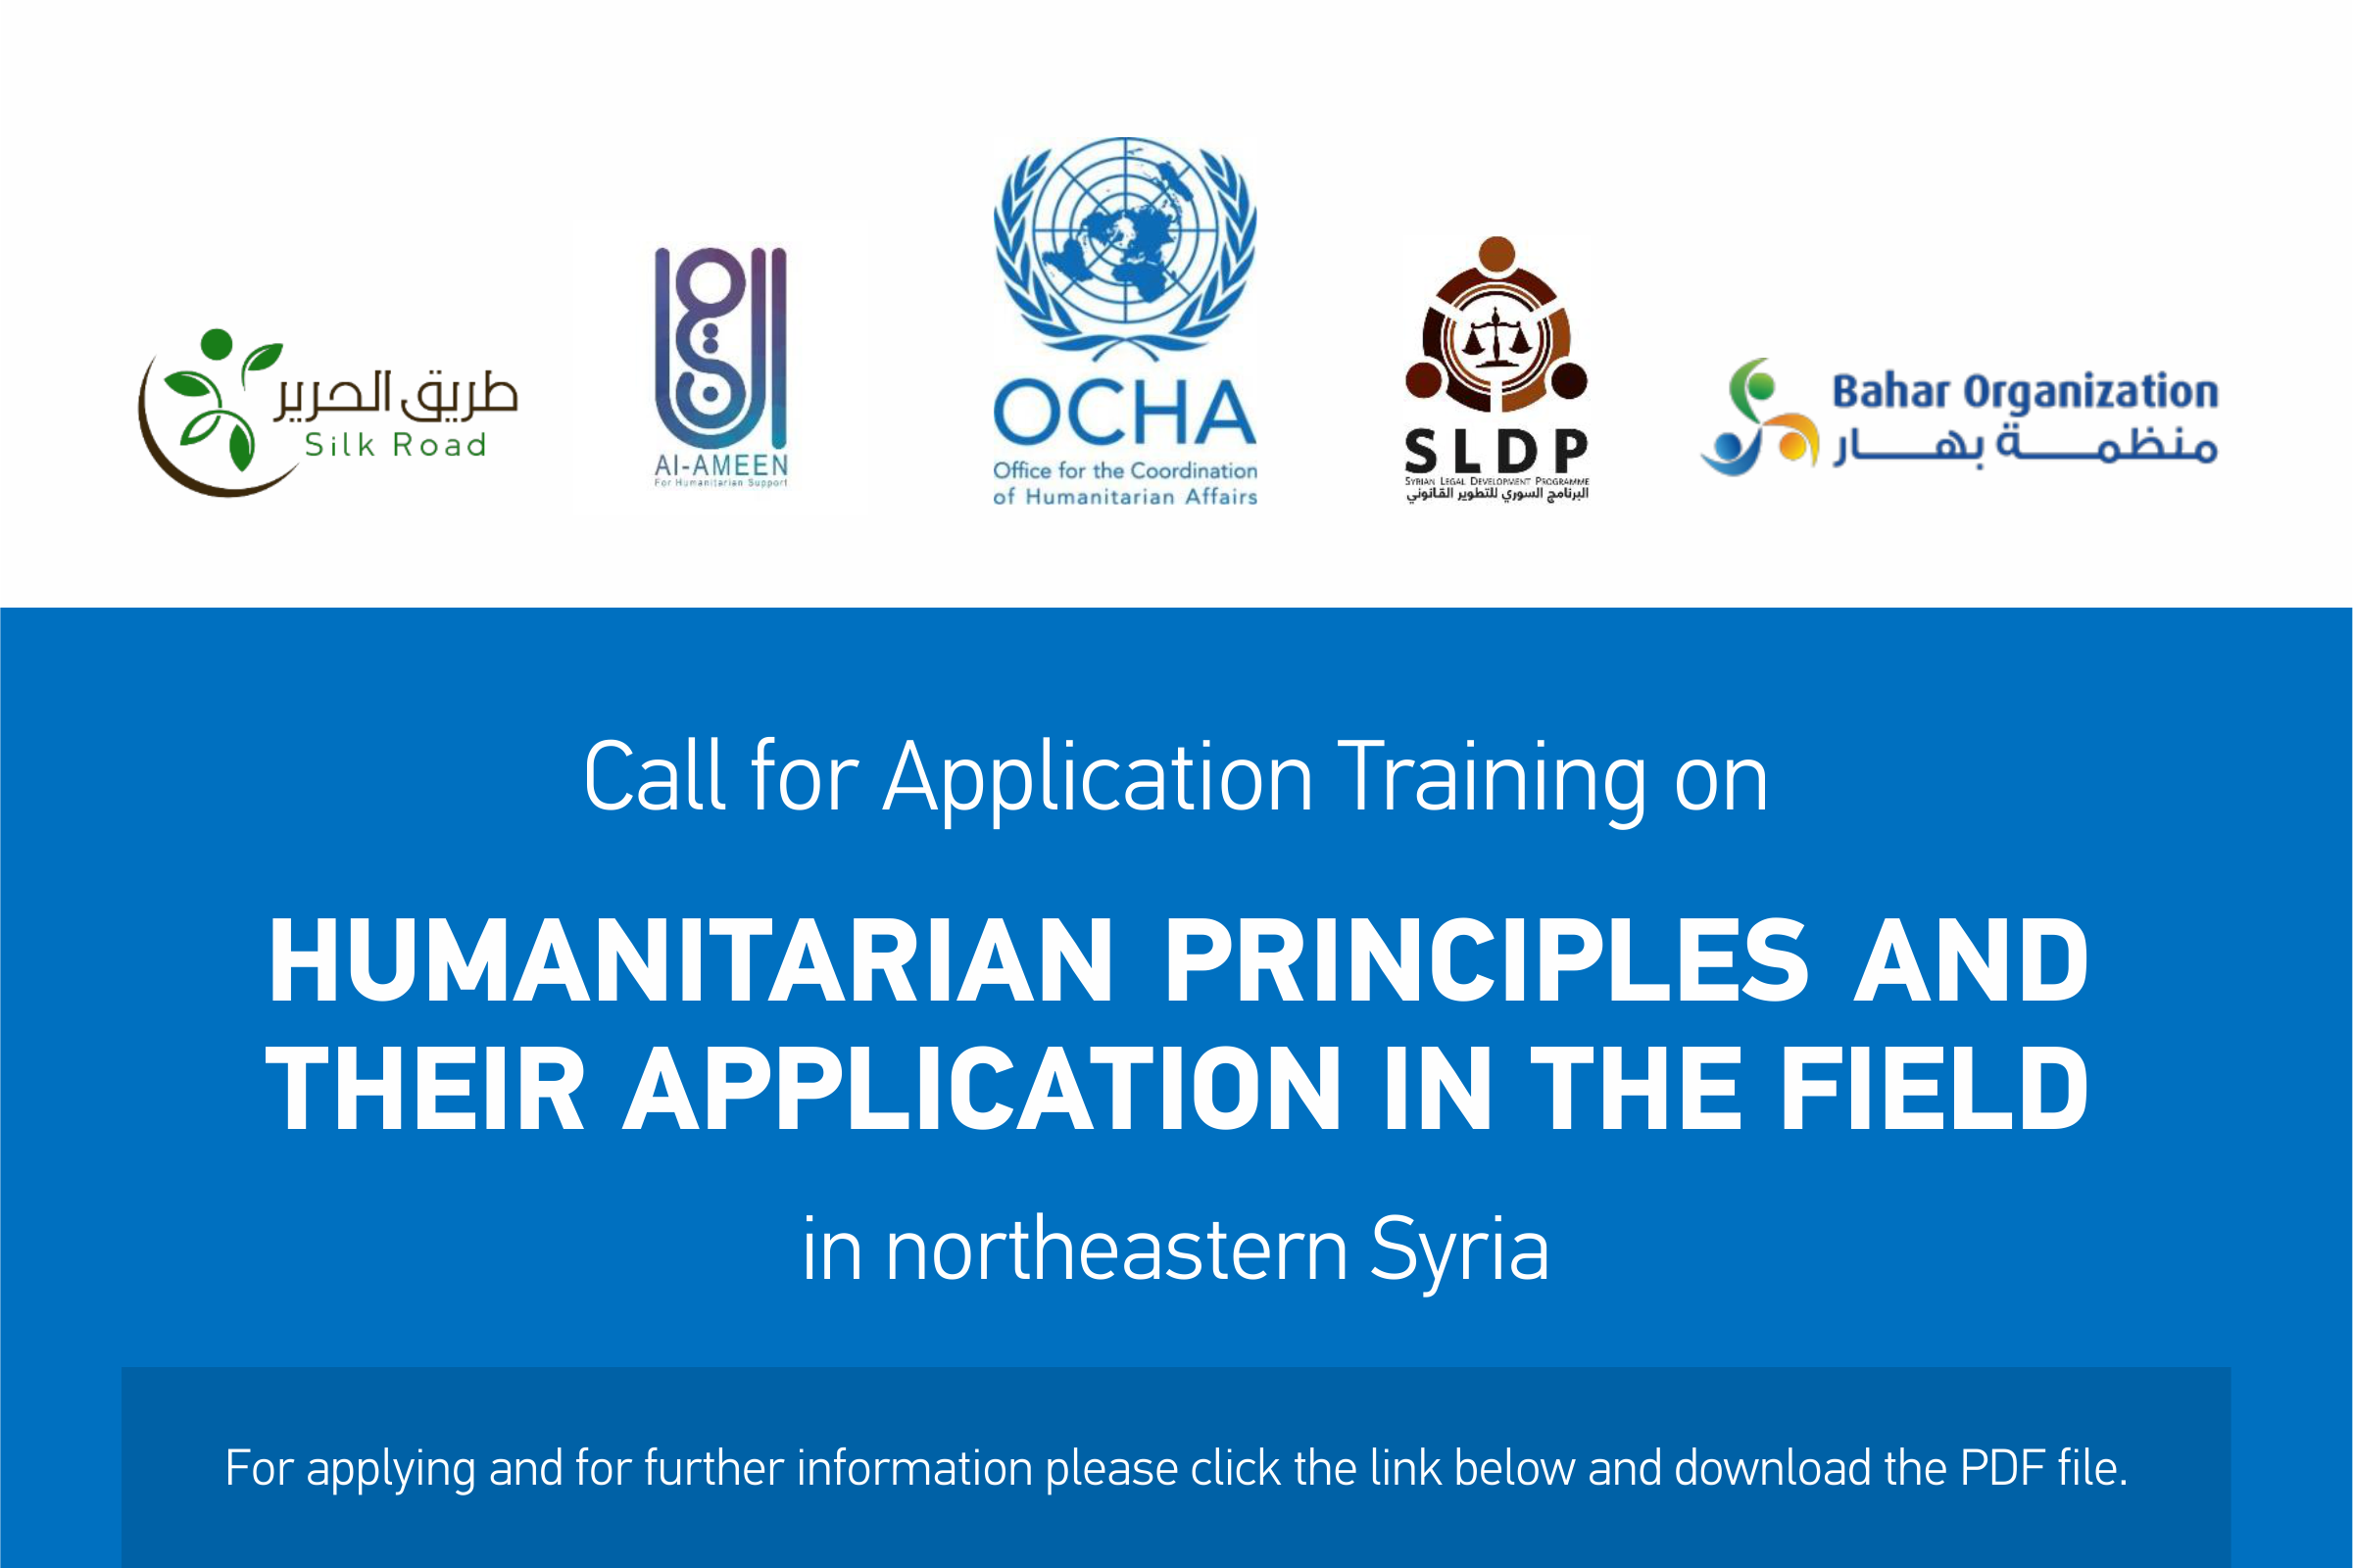 Call for Application Training on Humanitarian Principles and their application in the field